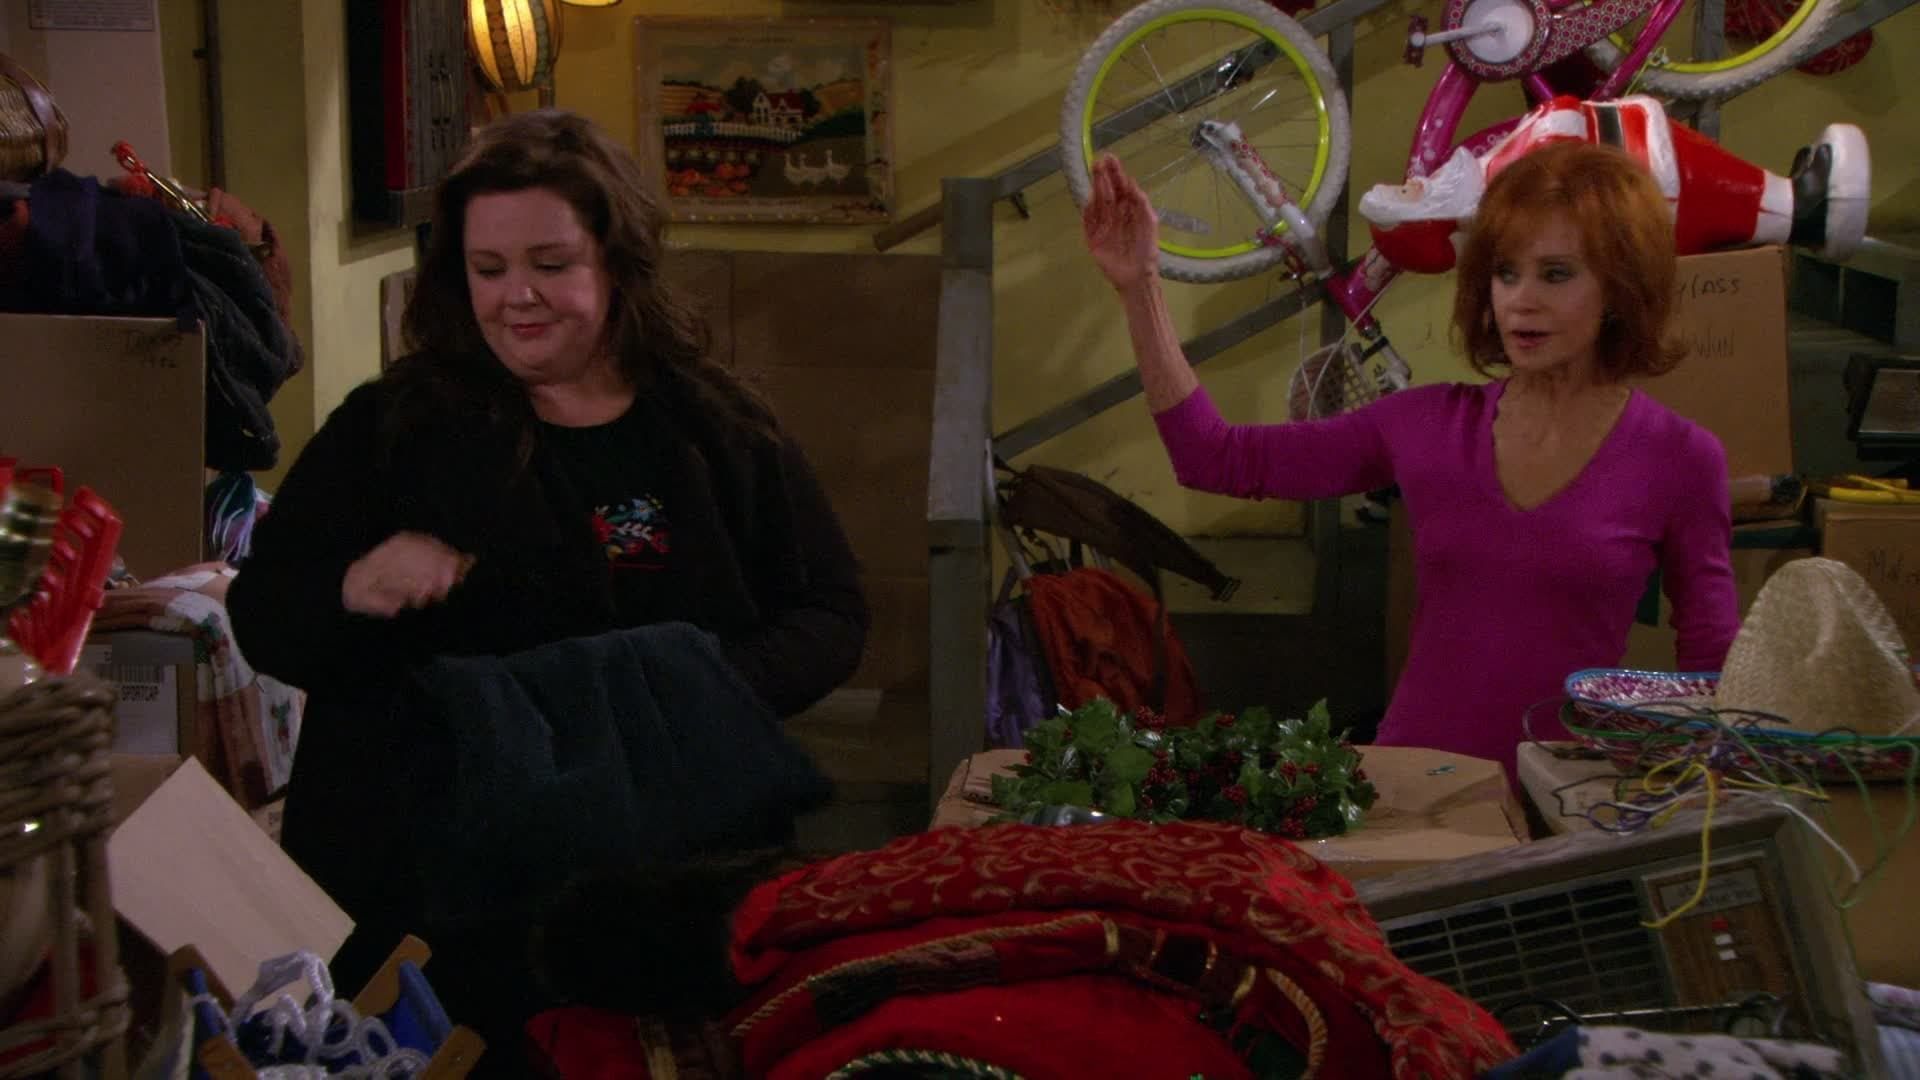 Mike & Molly background